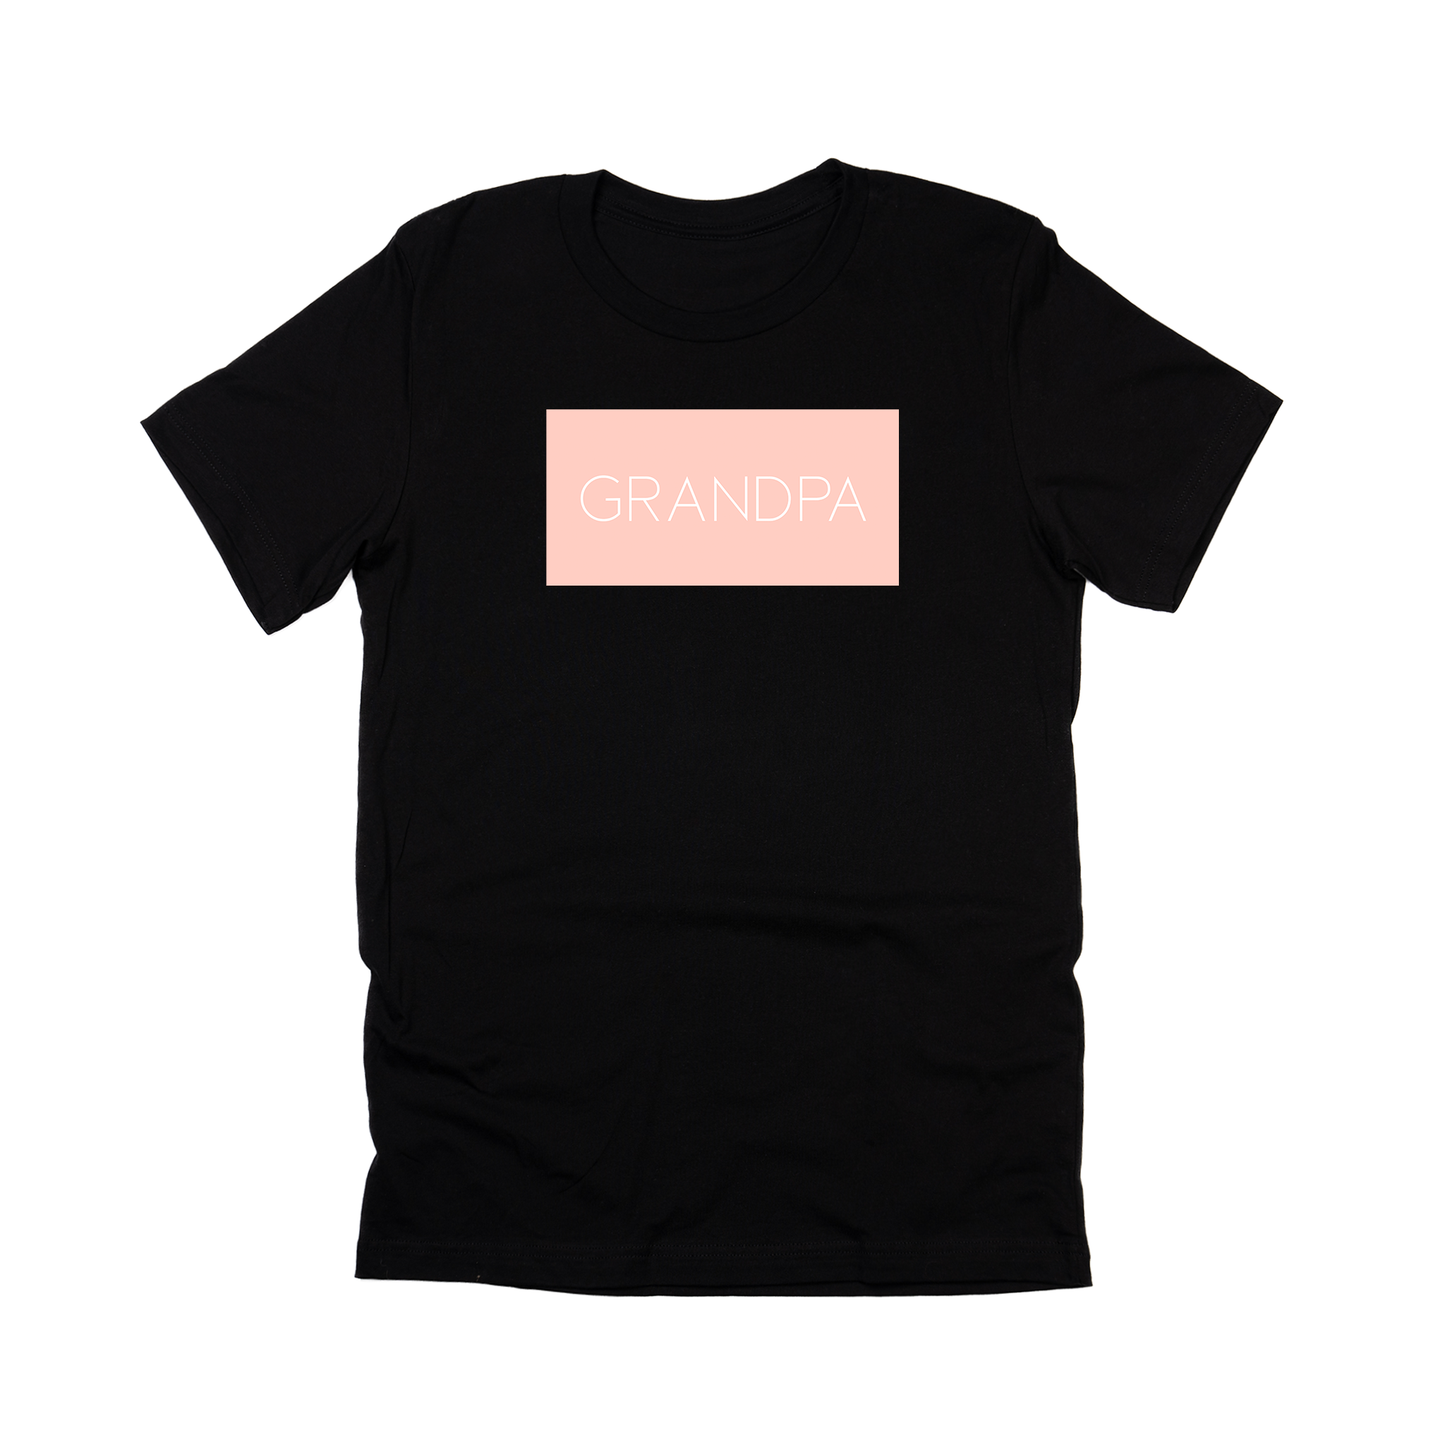 Grandpa (Boxed Collection, Ballerina Pink Box/White Text, Across Front) - Tee (Black)